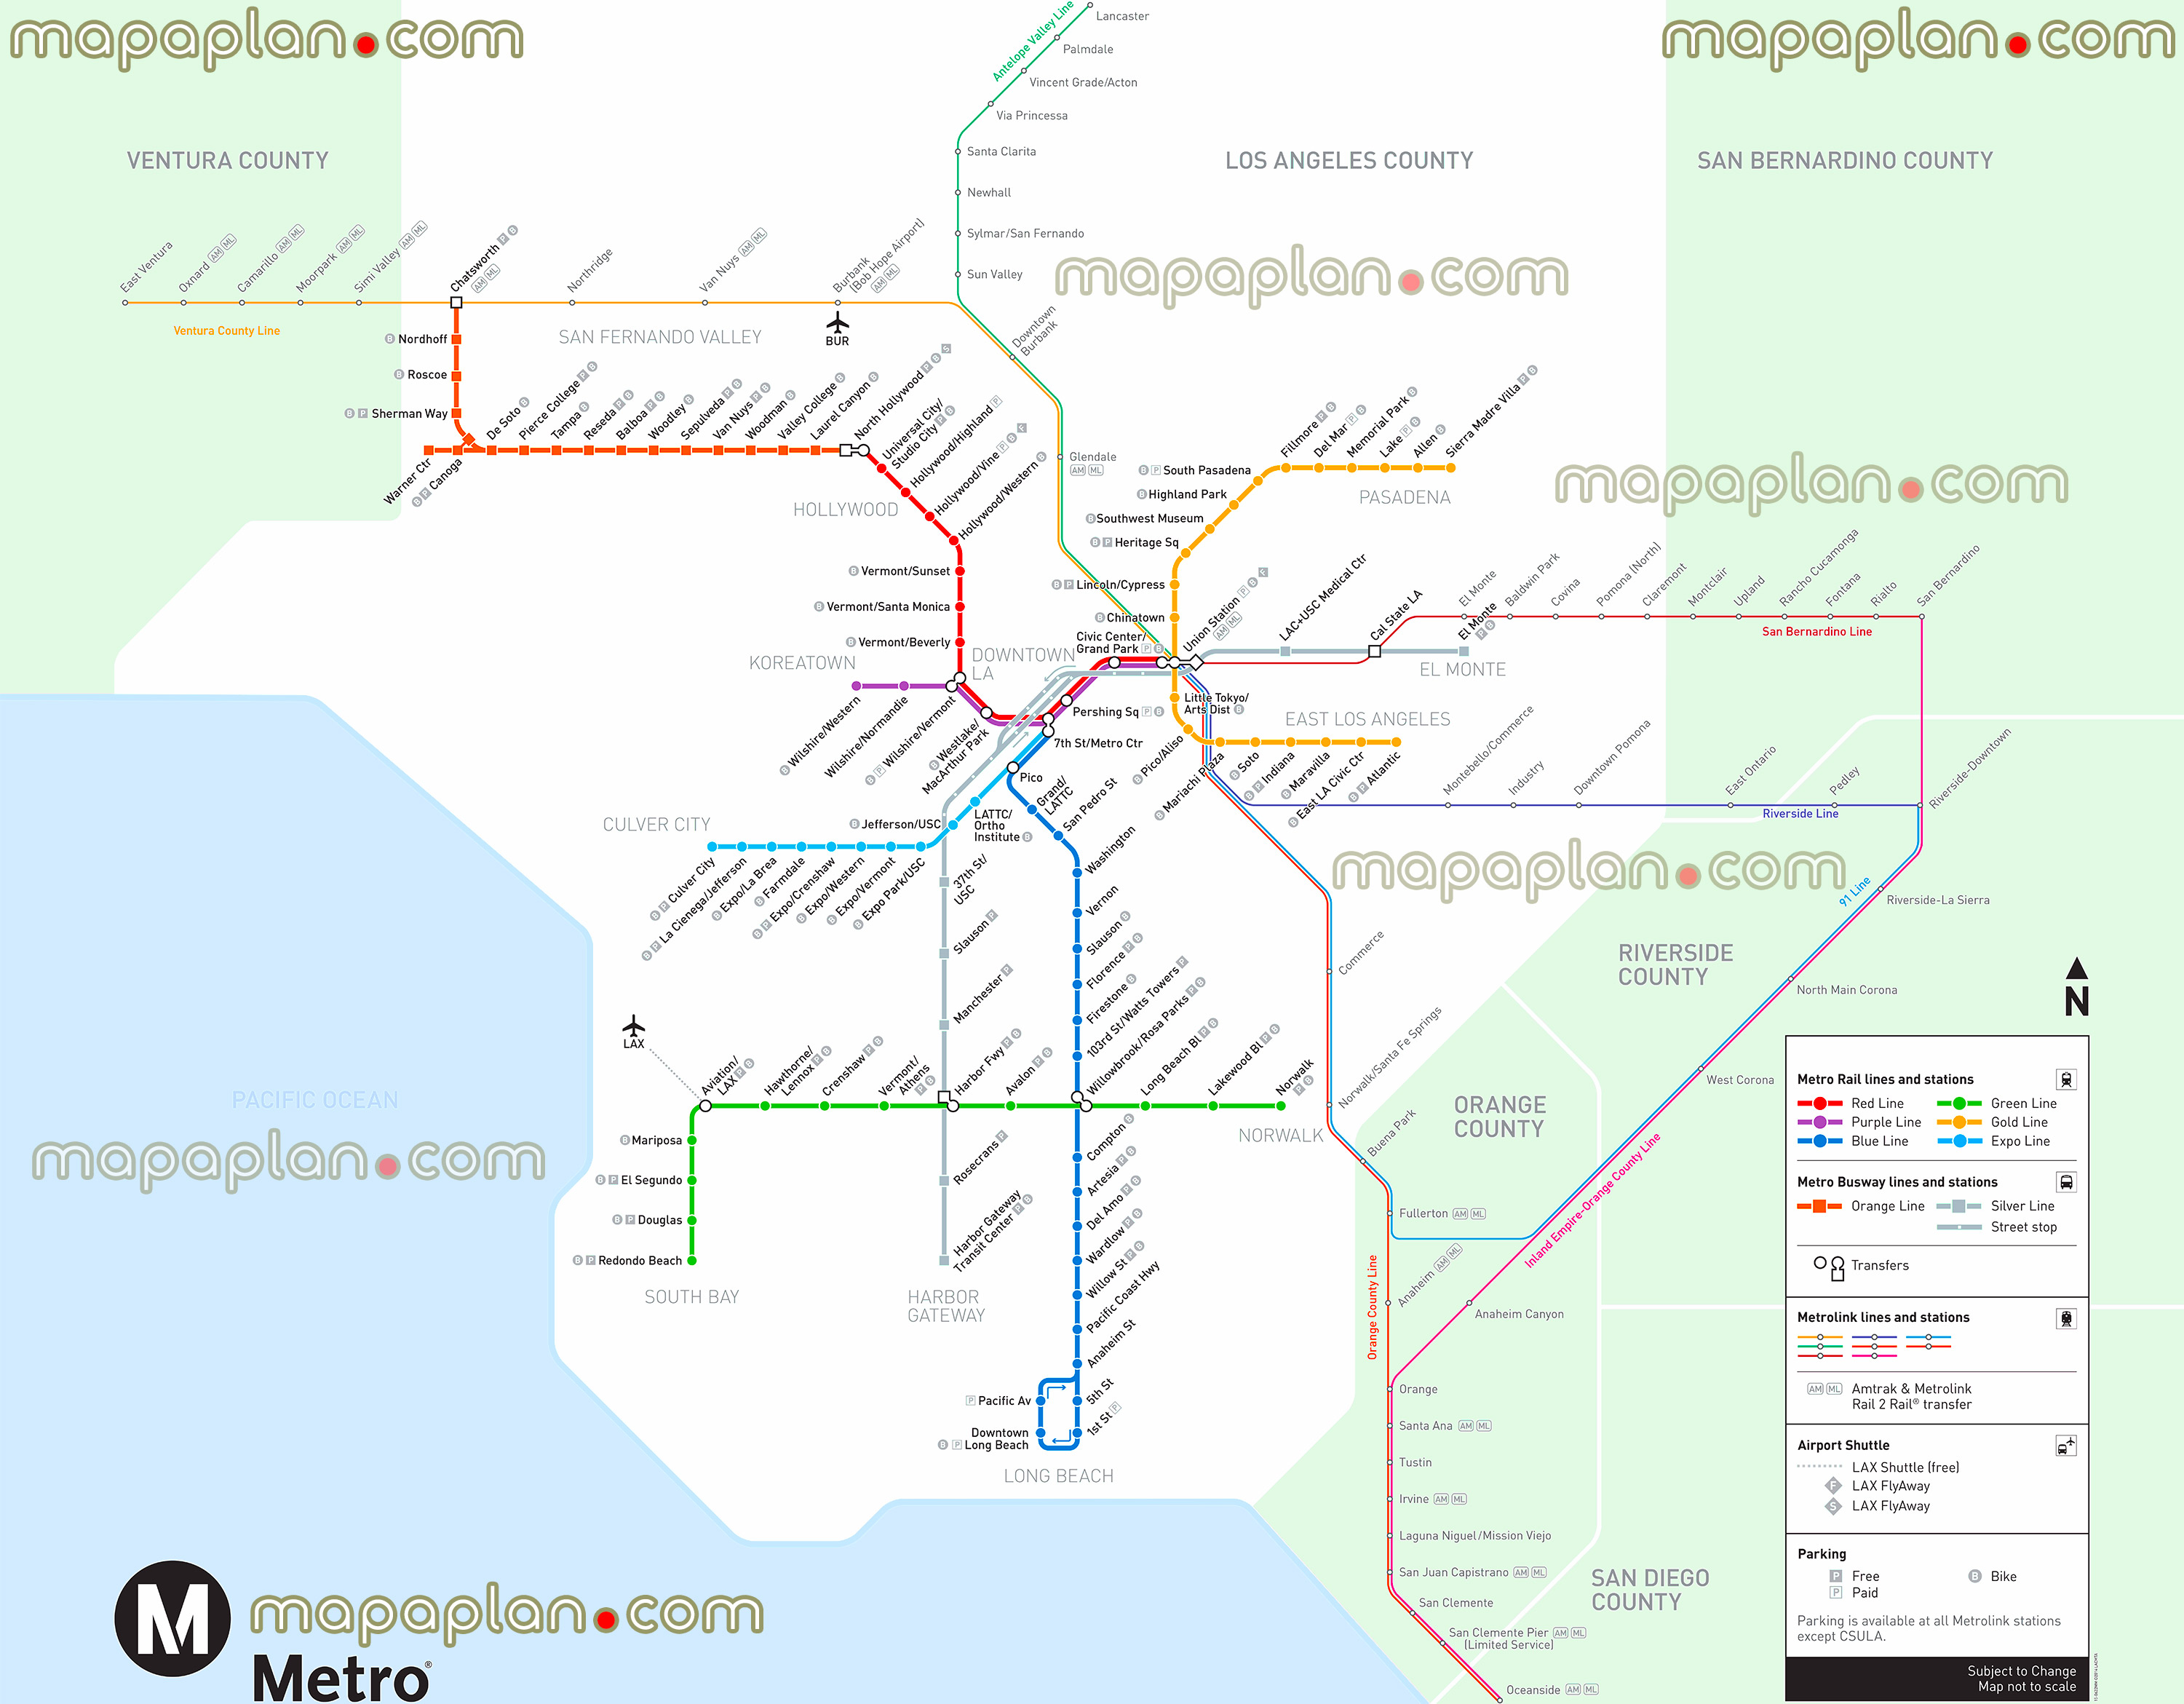 metro rail subway metrolink busway stations lines mta public transportation system network diagram blue expo gold red yellow silver purple green orange railway transit stops commuter light train transport overground tube routes metropolitan authoritys Los Angeles top tourist attractions map